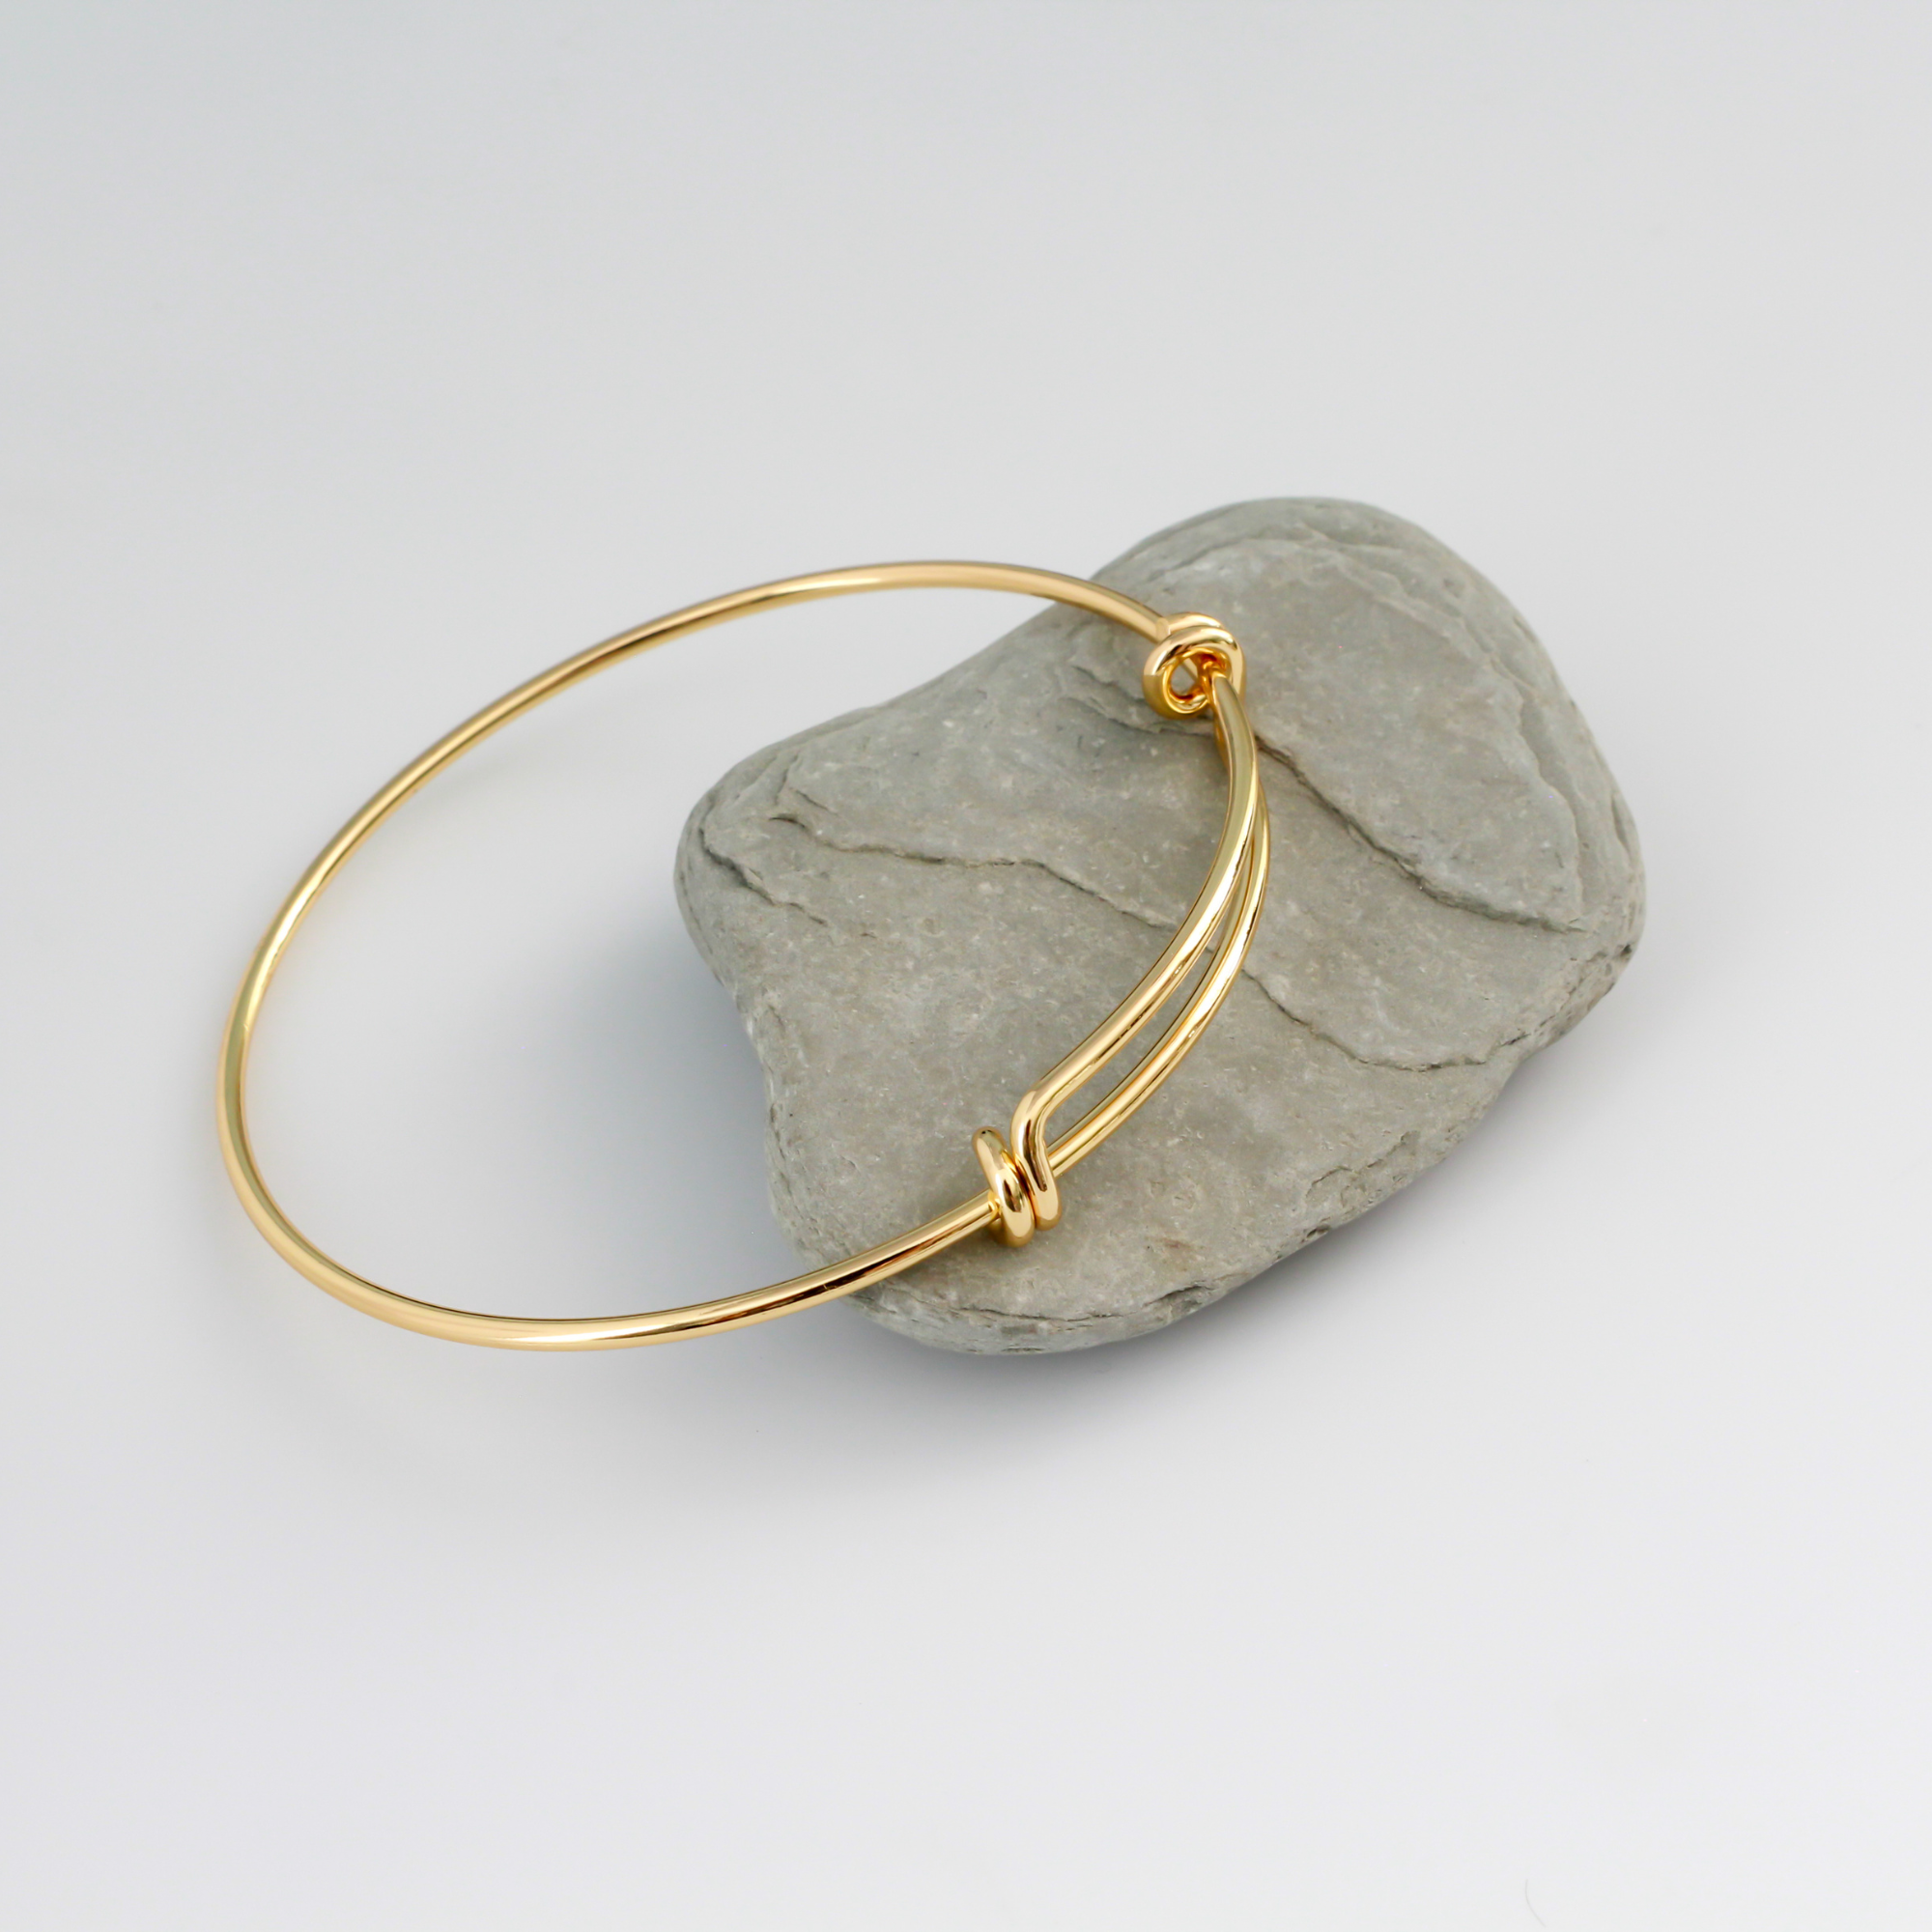 Adjustable bangle bracelet that you can wear as is or add charms to. Copper base with 18k gold plating.